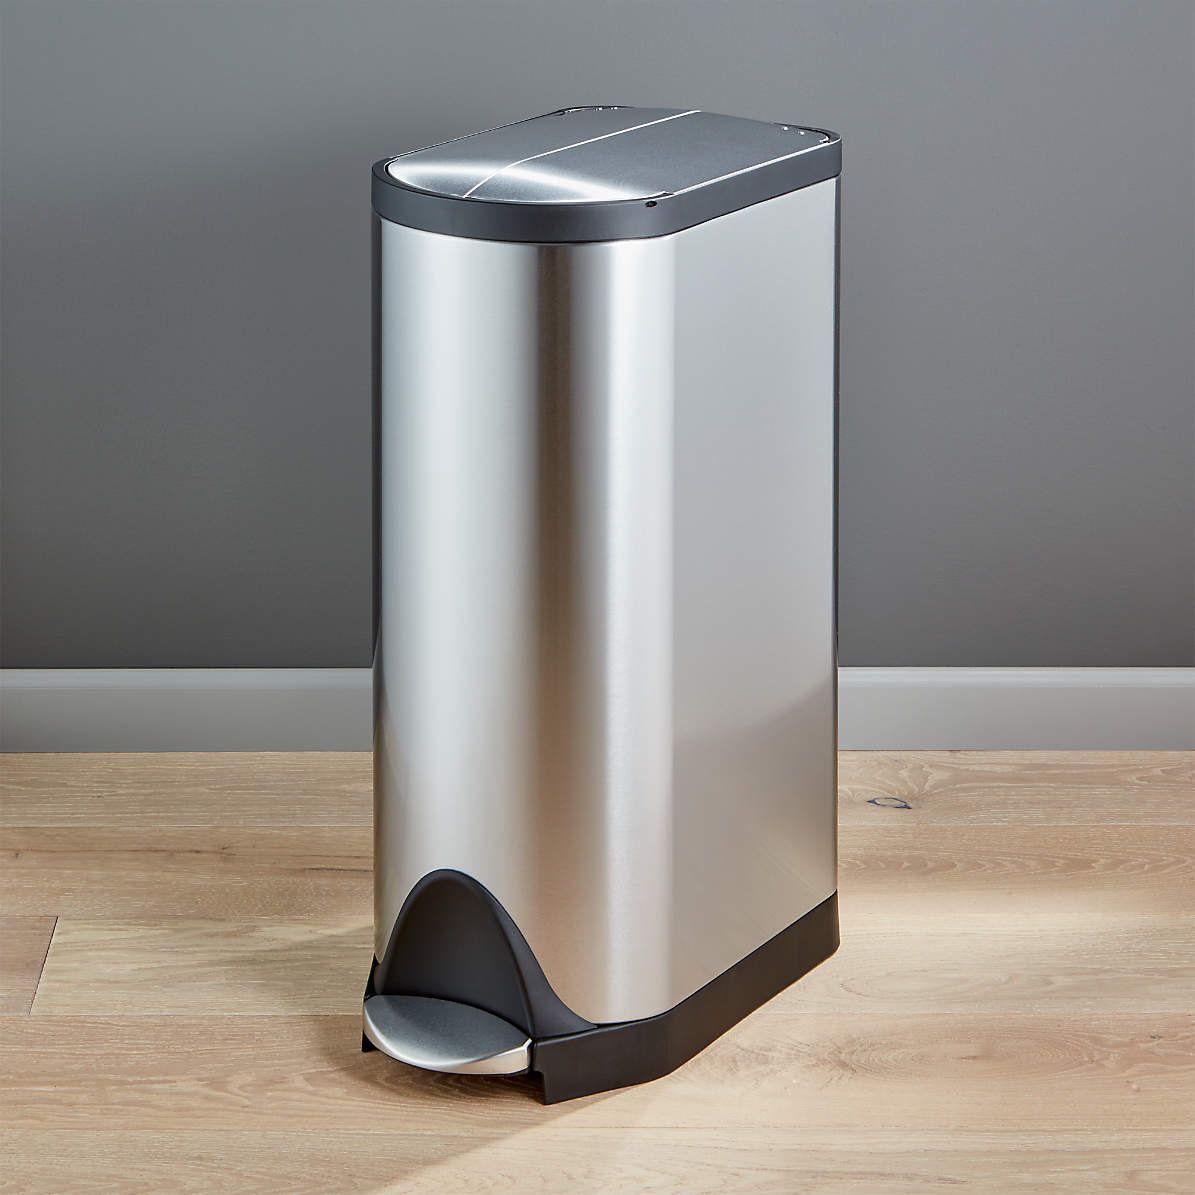 simplehuman® Step-On Stainless Steel Trash Can - 10 Gallon H-3623 - Uline